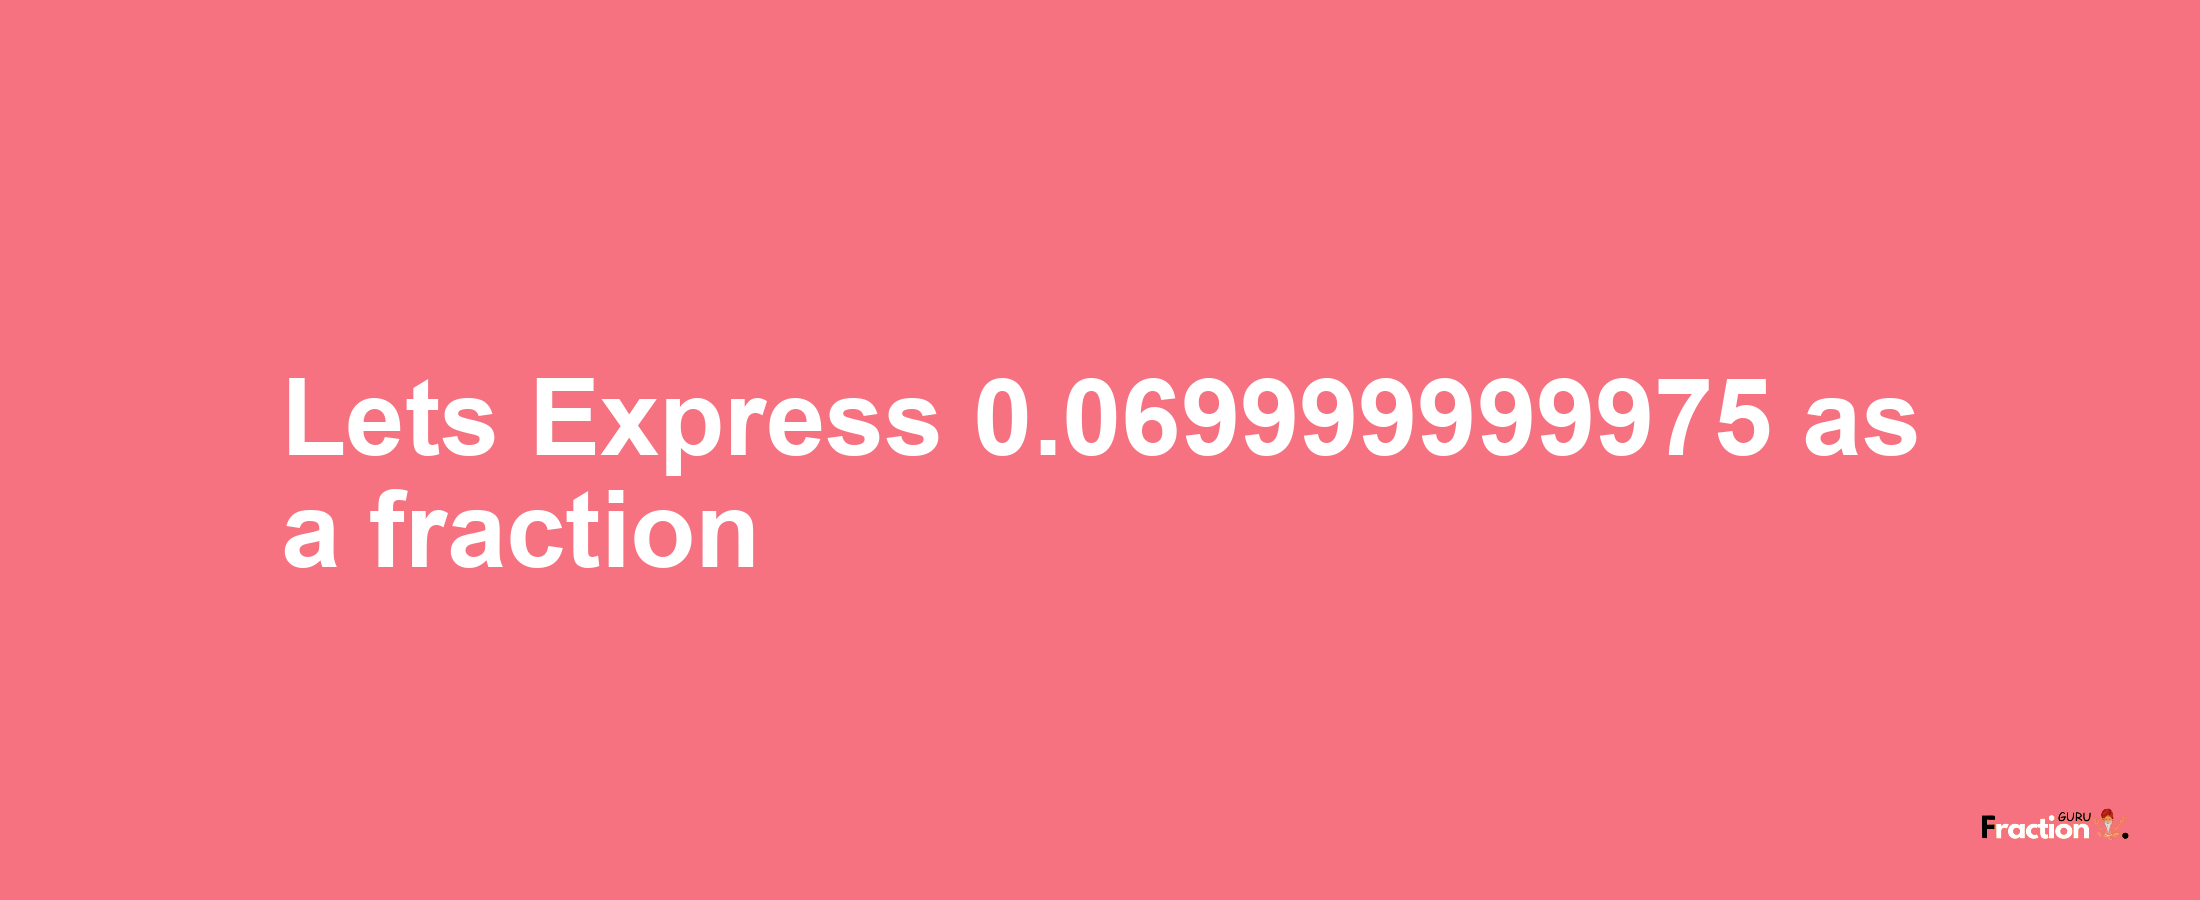 Lets Express 0.069999999975 as afraction